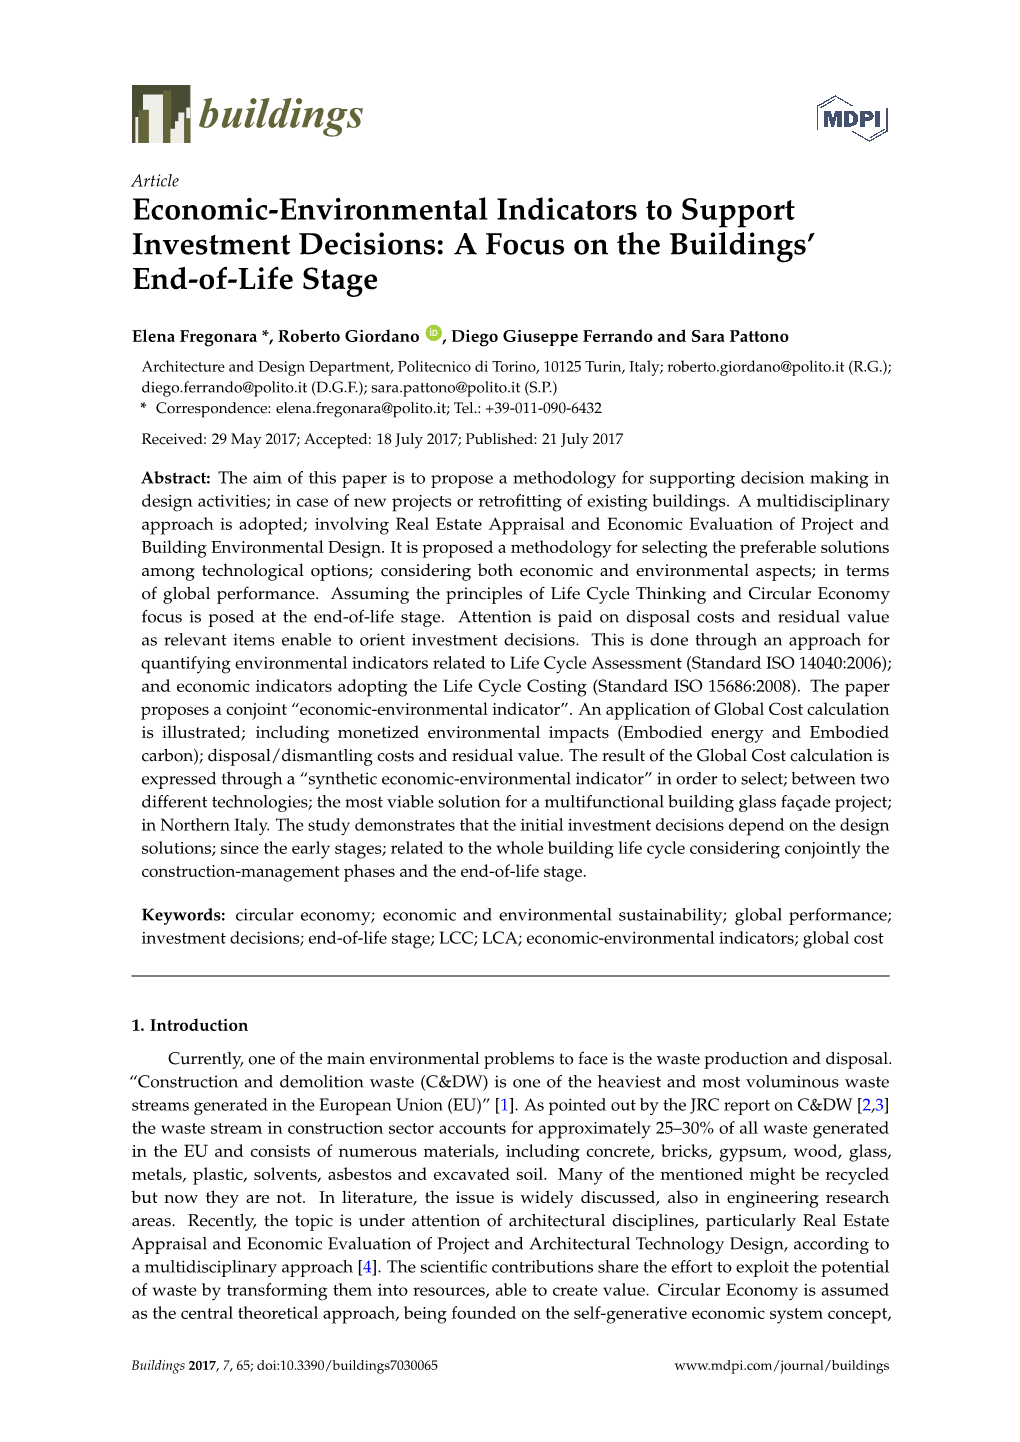 Economic-Environmental Indicators to Support Investment Decisions: a Focus on the Buildings’ End-Of-Life Stage